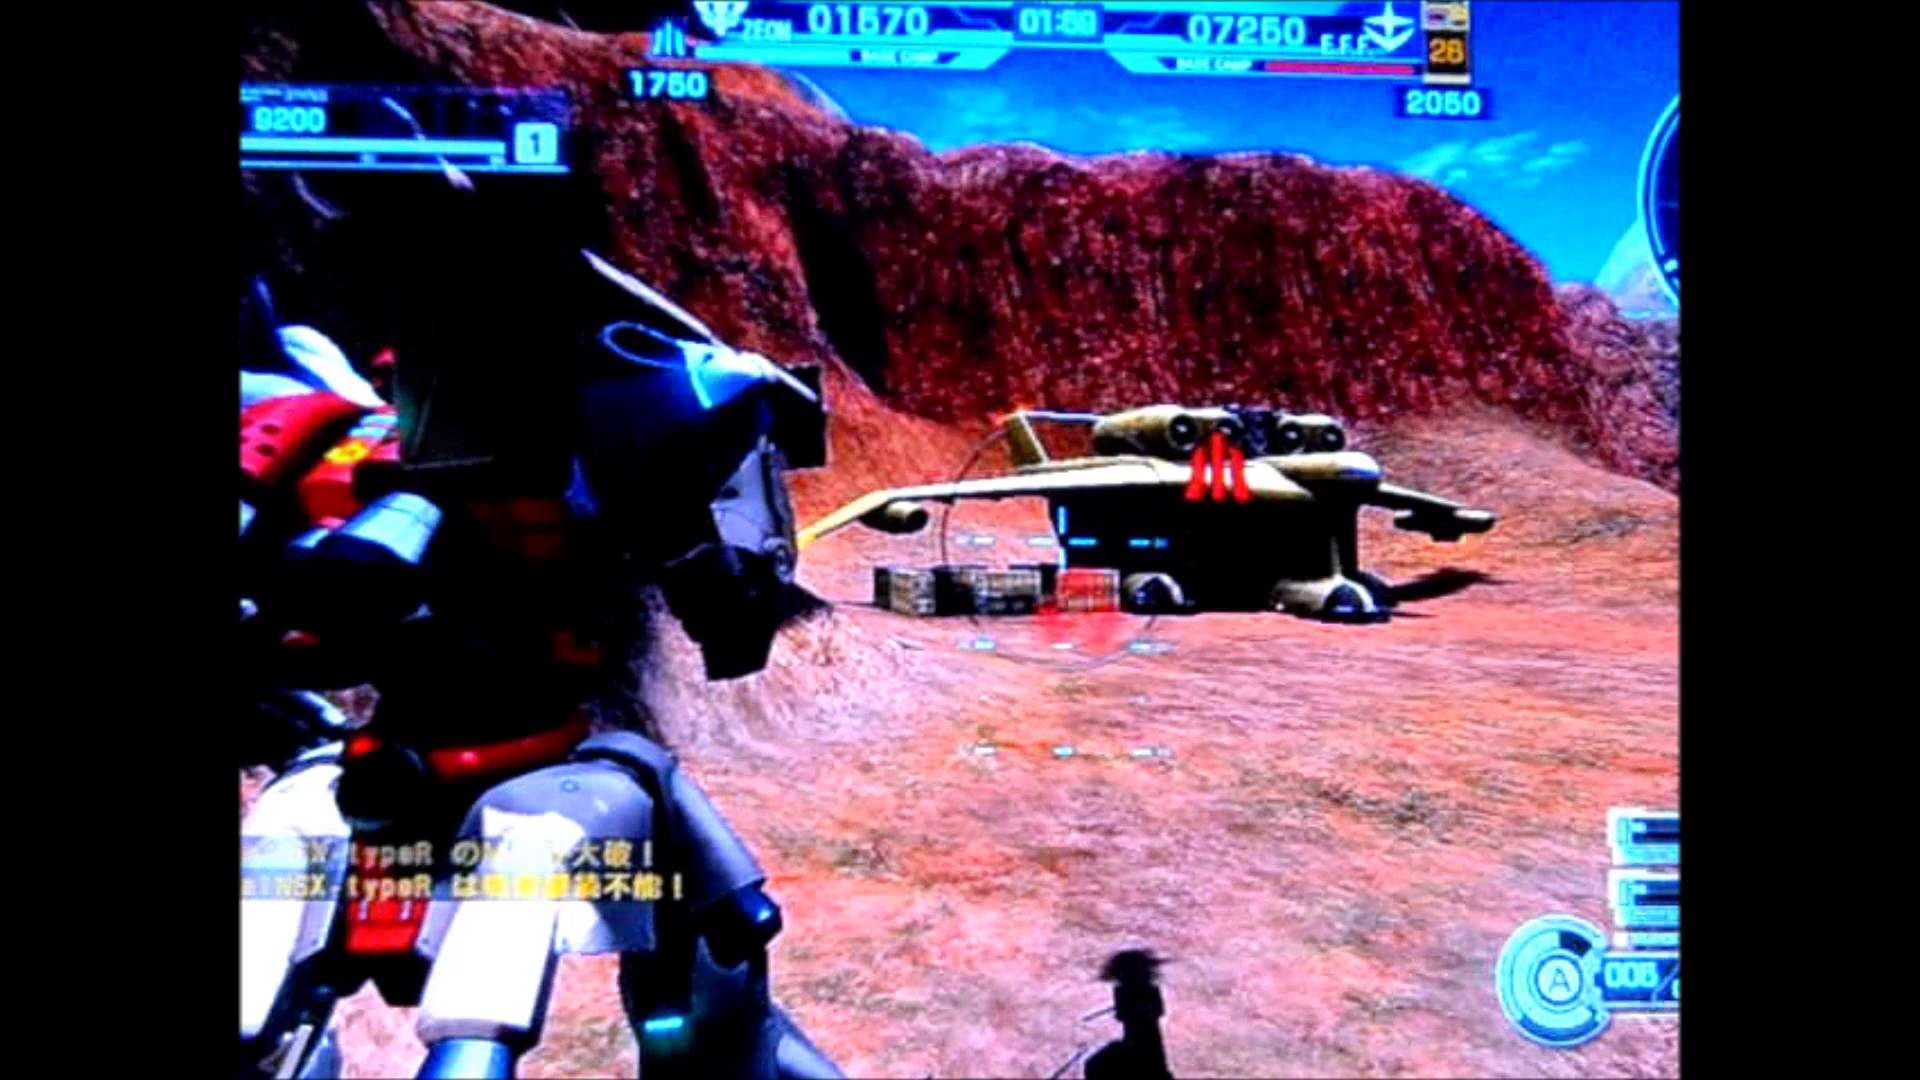 1920x1080 Ps3 game GUNDAM BATTLE OPERATION day 88 MS 018 E Kampfer in Action